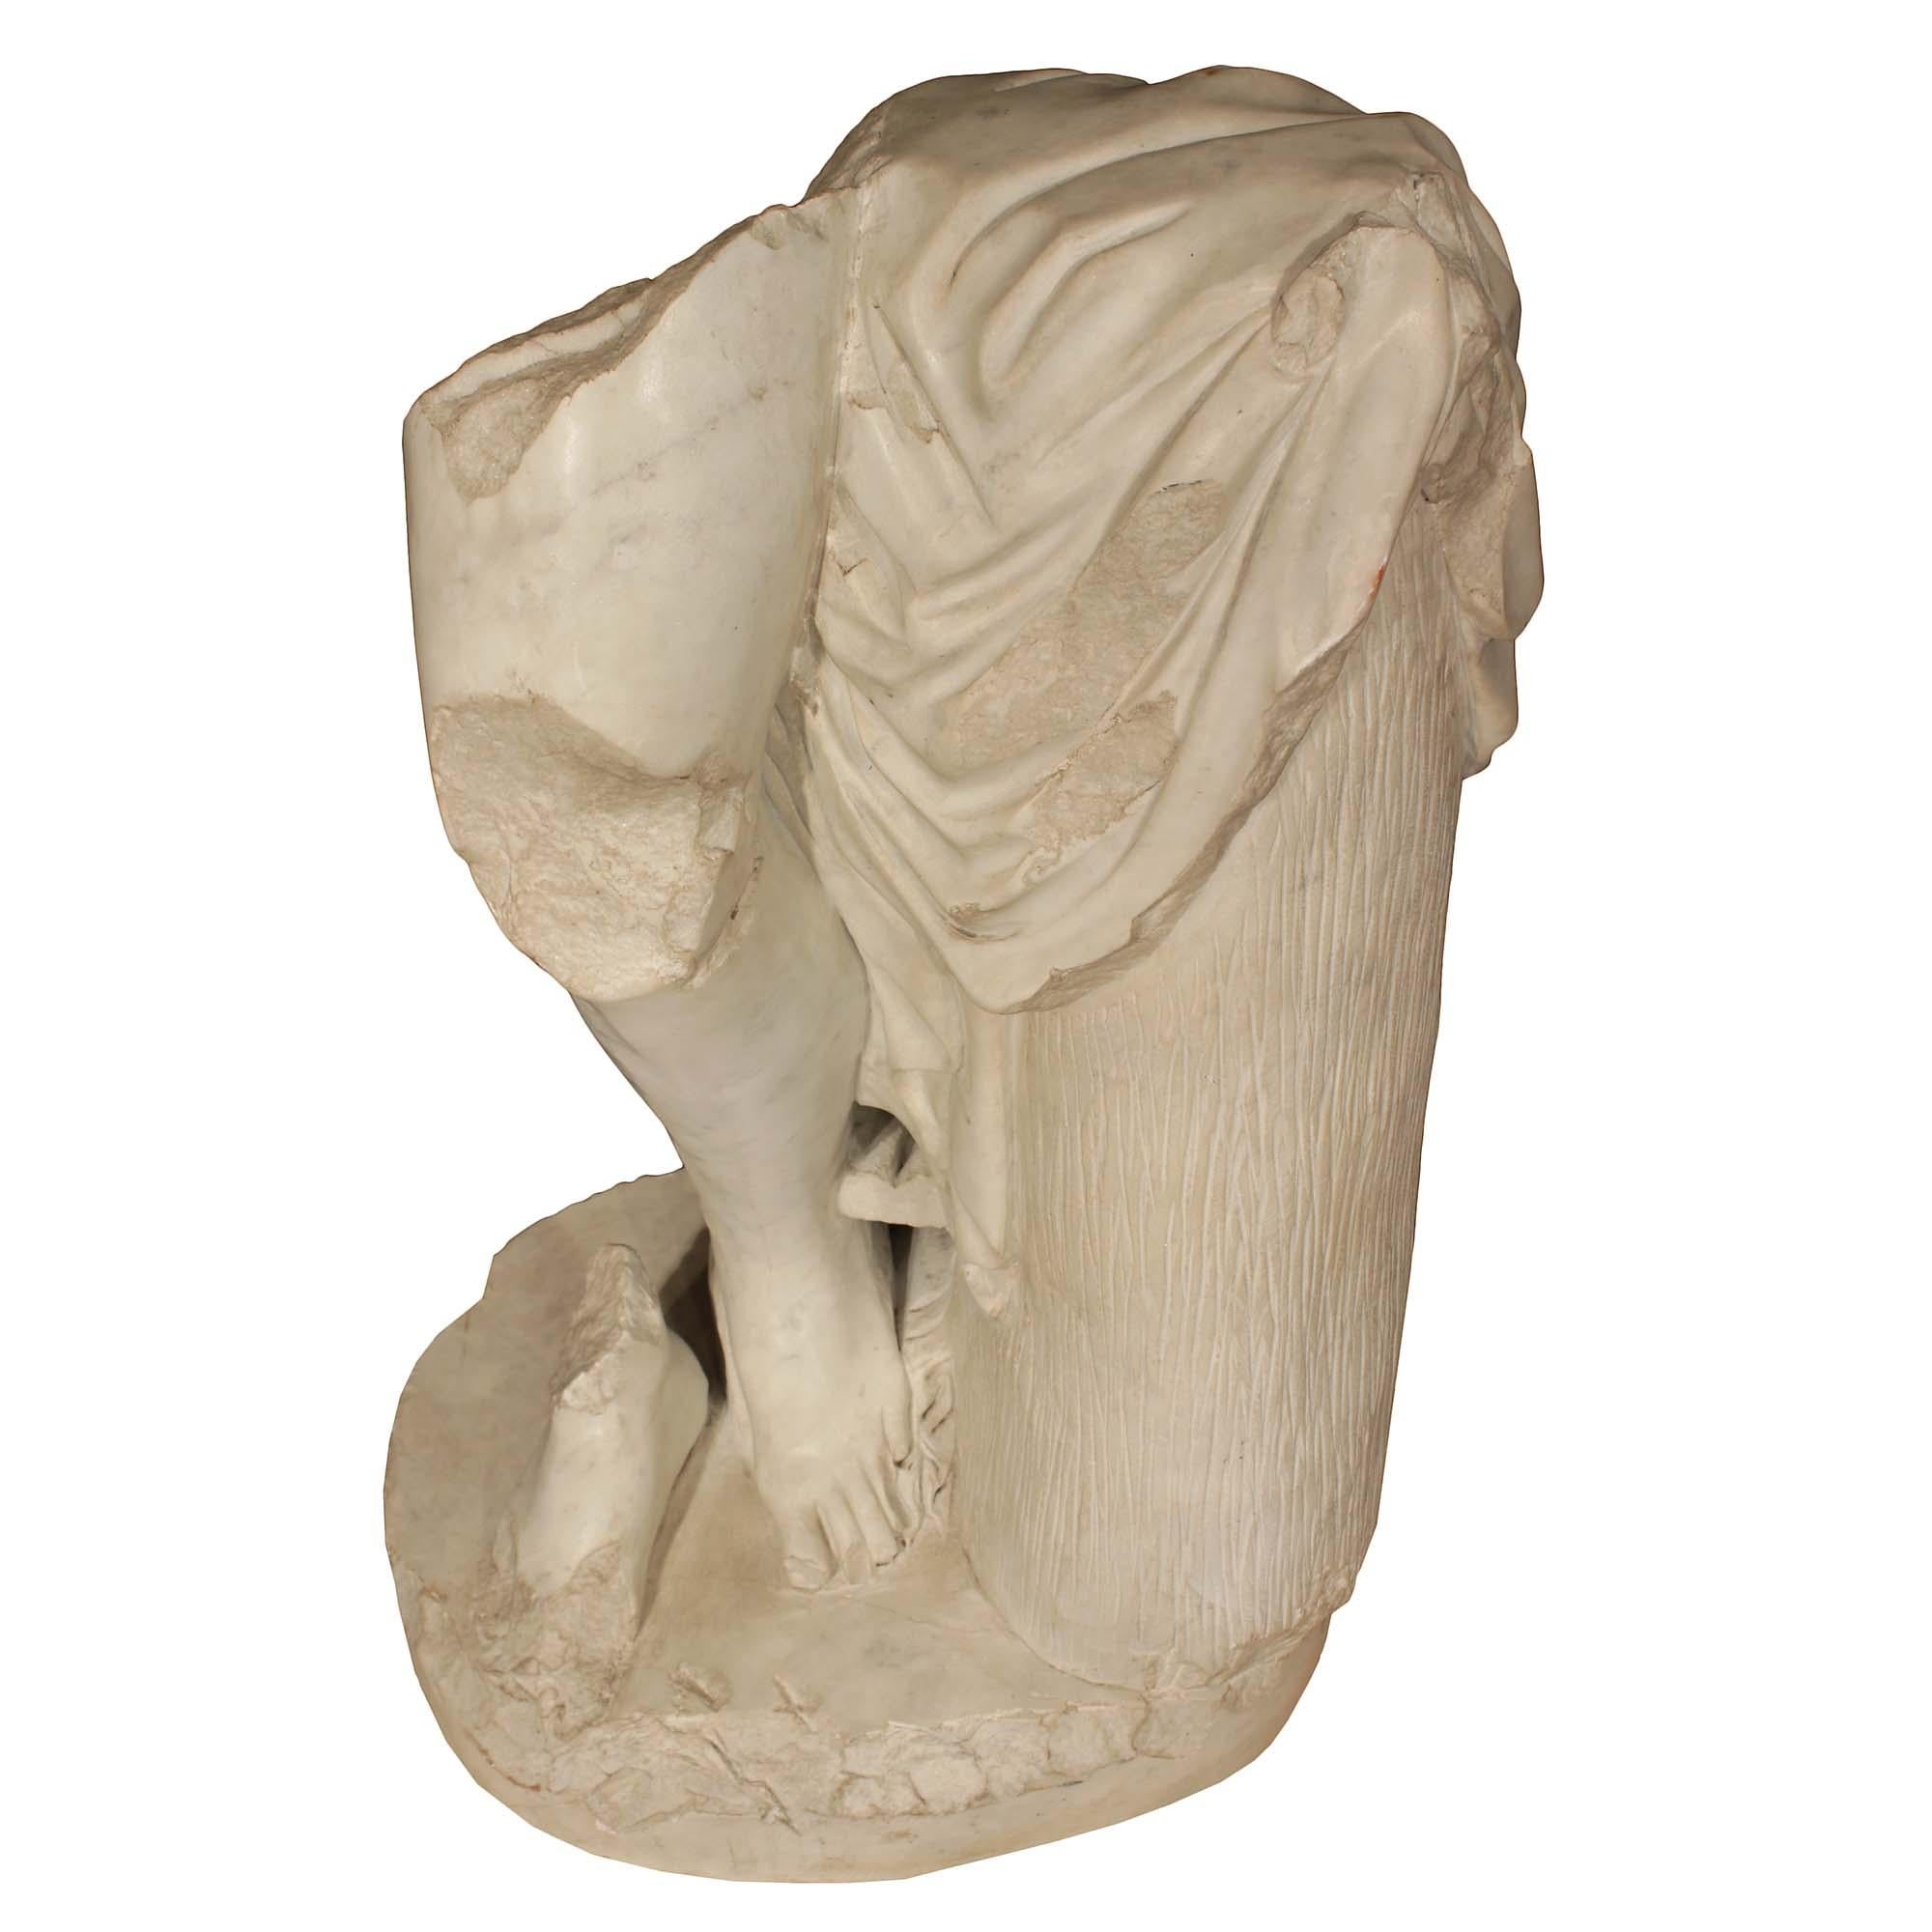 An exceptional and decorative and handsome 19th century Italian white Carrara marble statue. This spectacular marble fragment of a leg and feet, likely a classical figure donning a flowing cape, beside a column. All raised on a circular base.